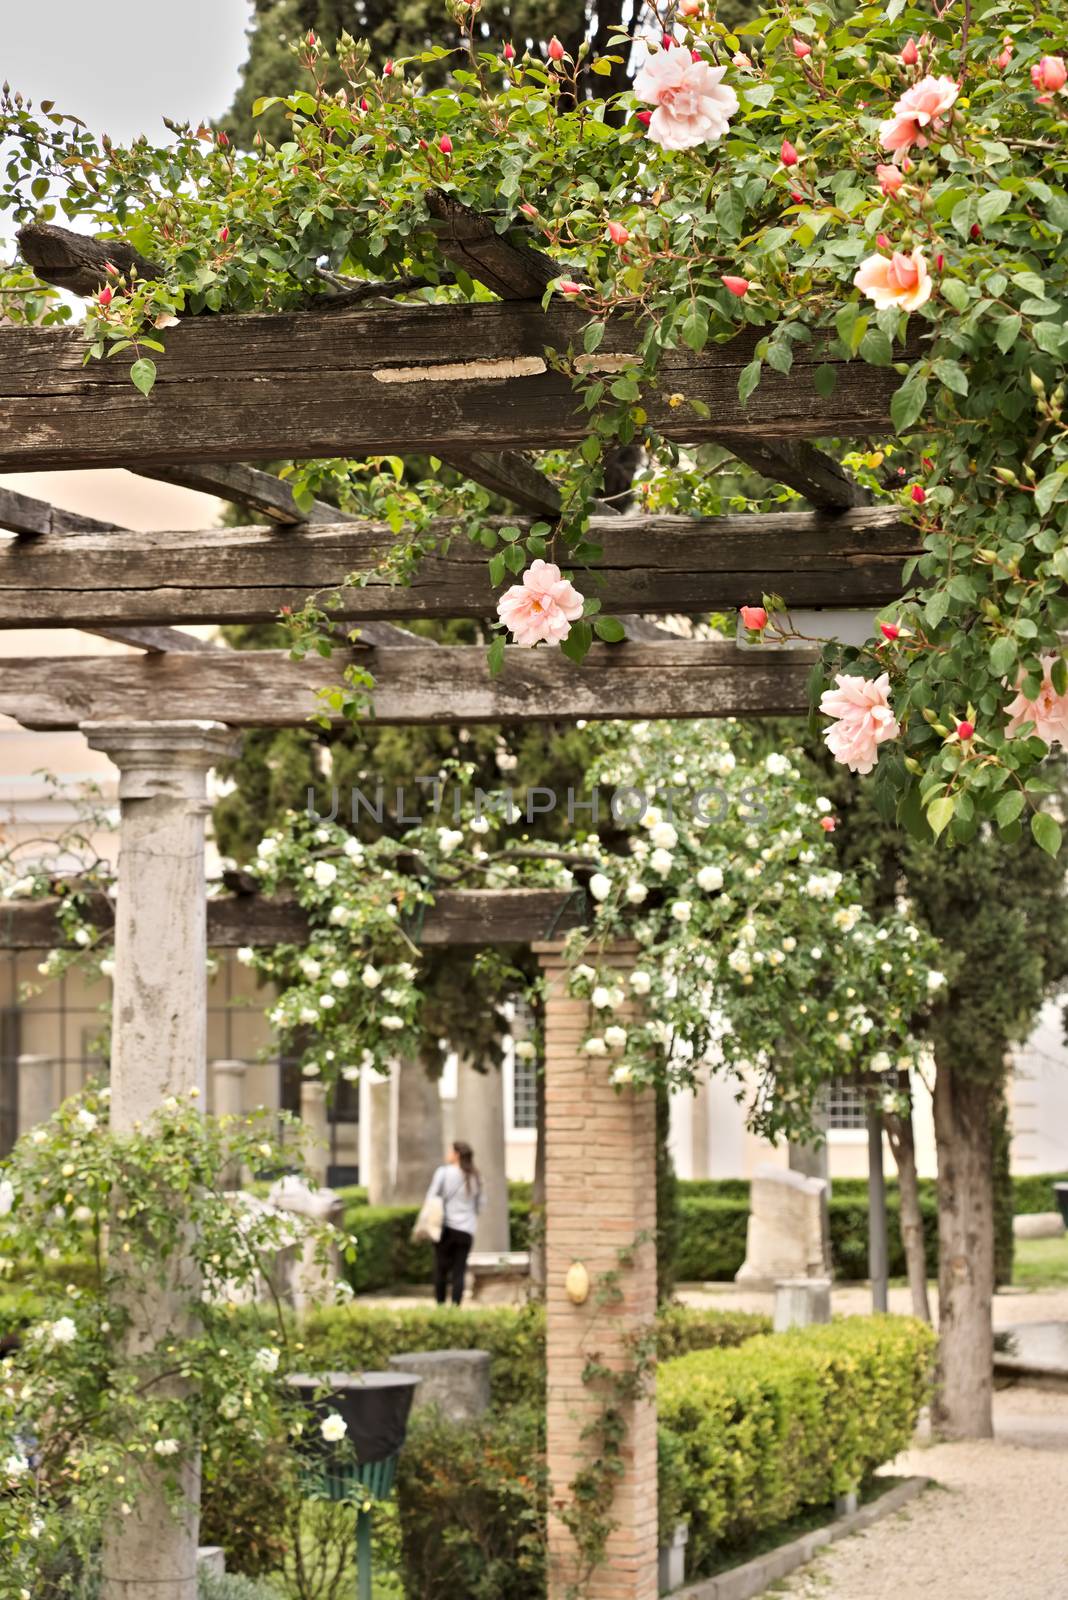 Garden in the archaeological area of Rome with a pergola of roses.